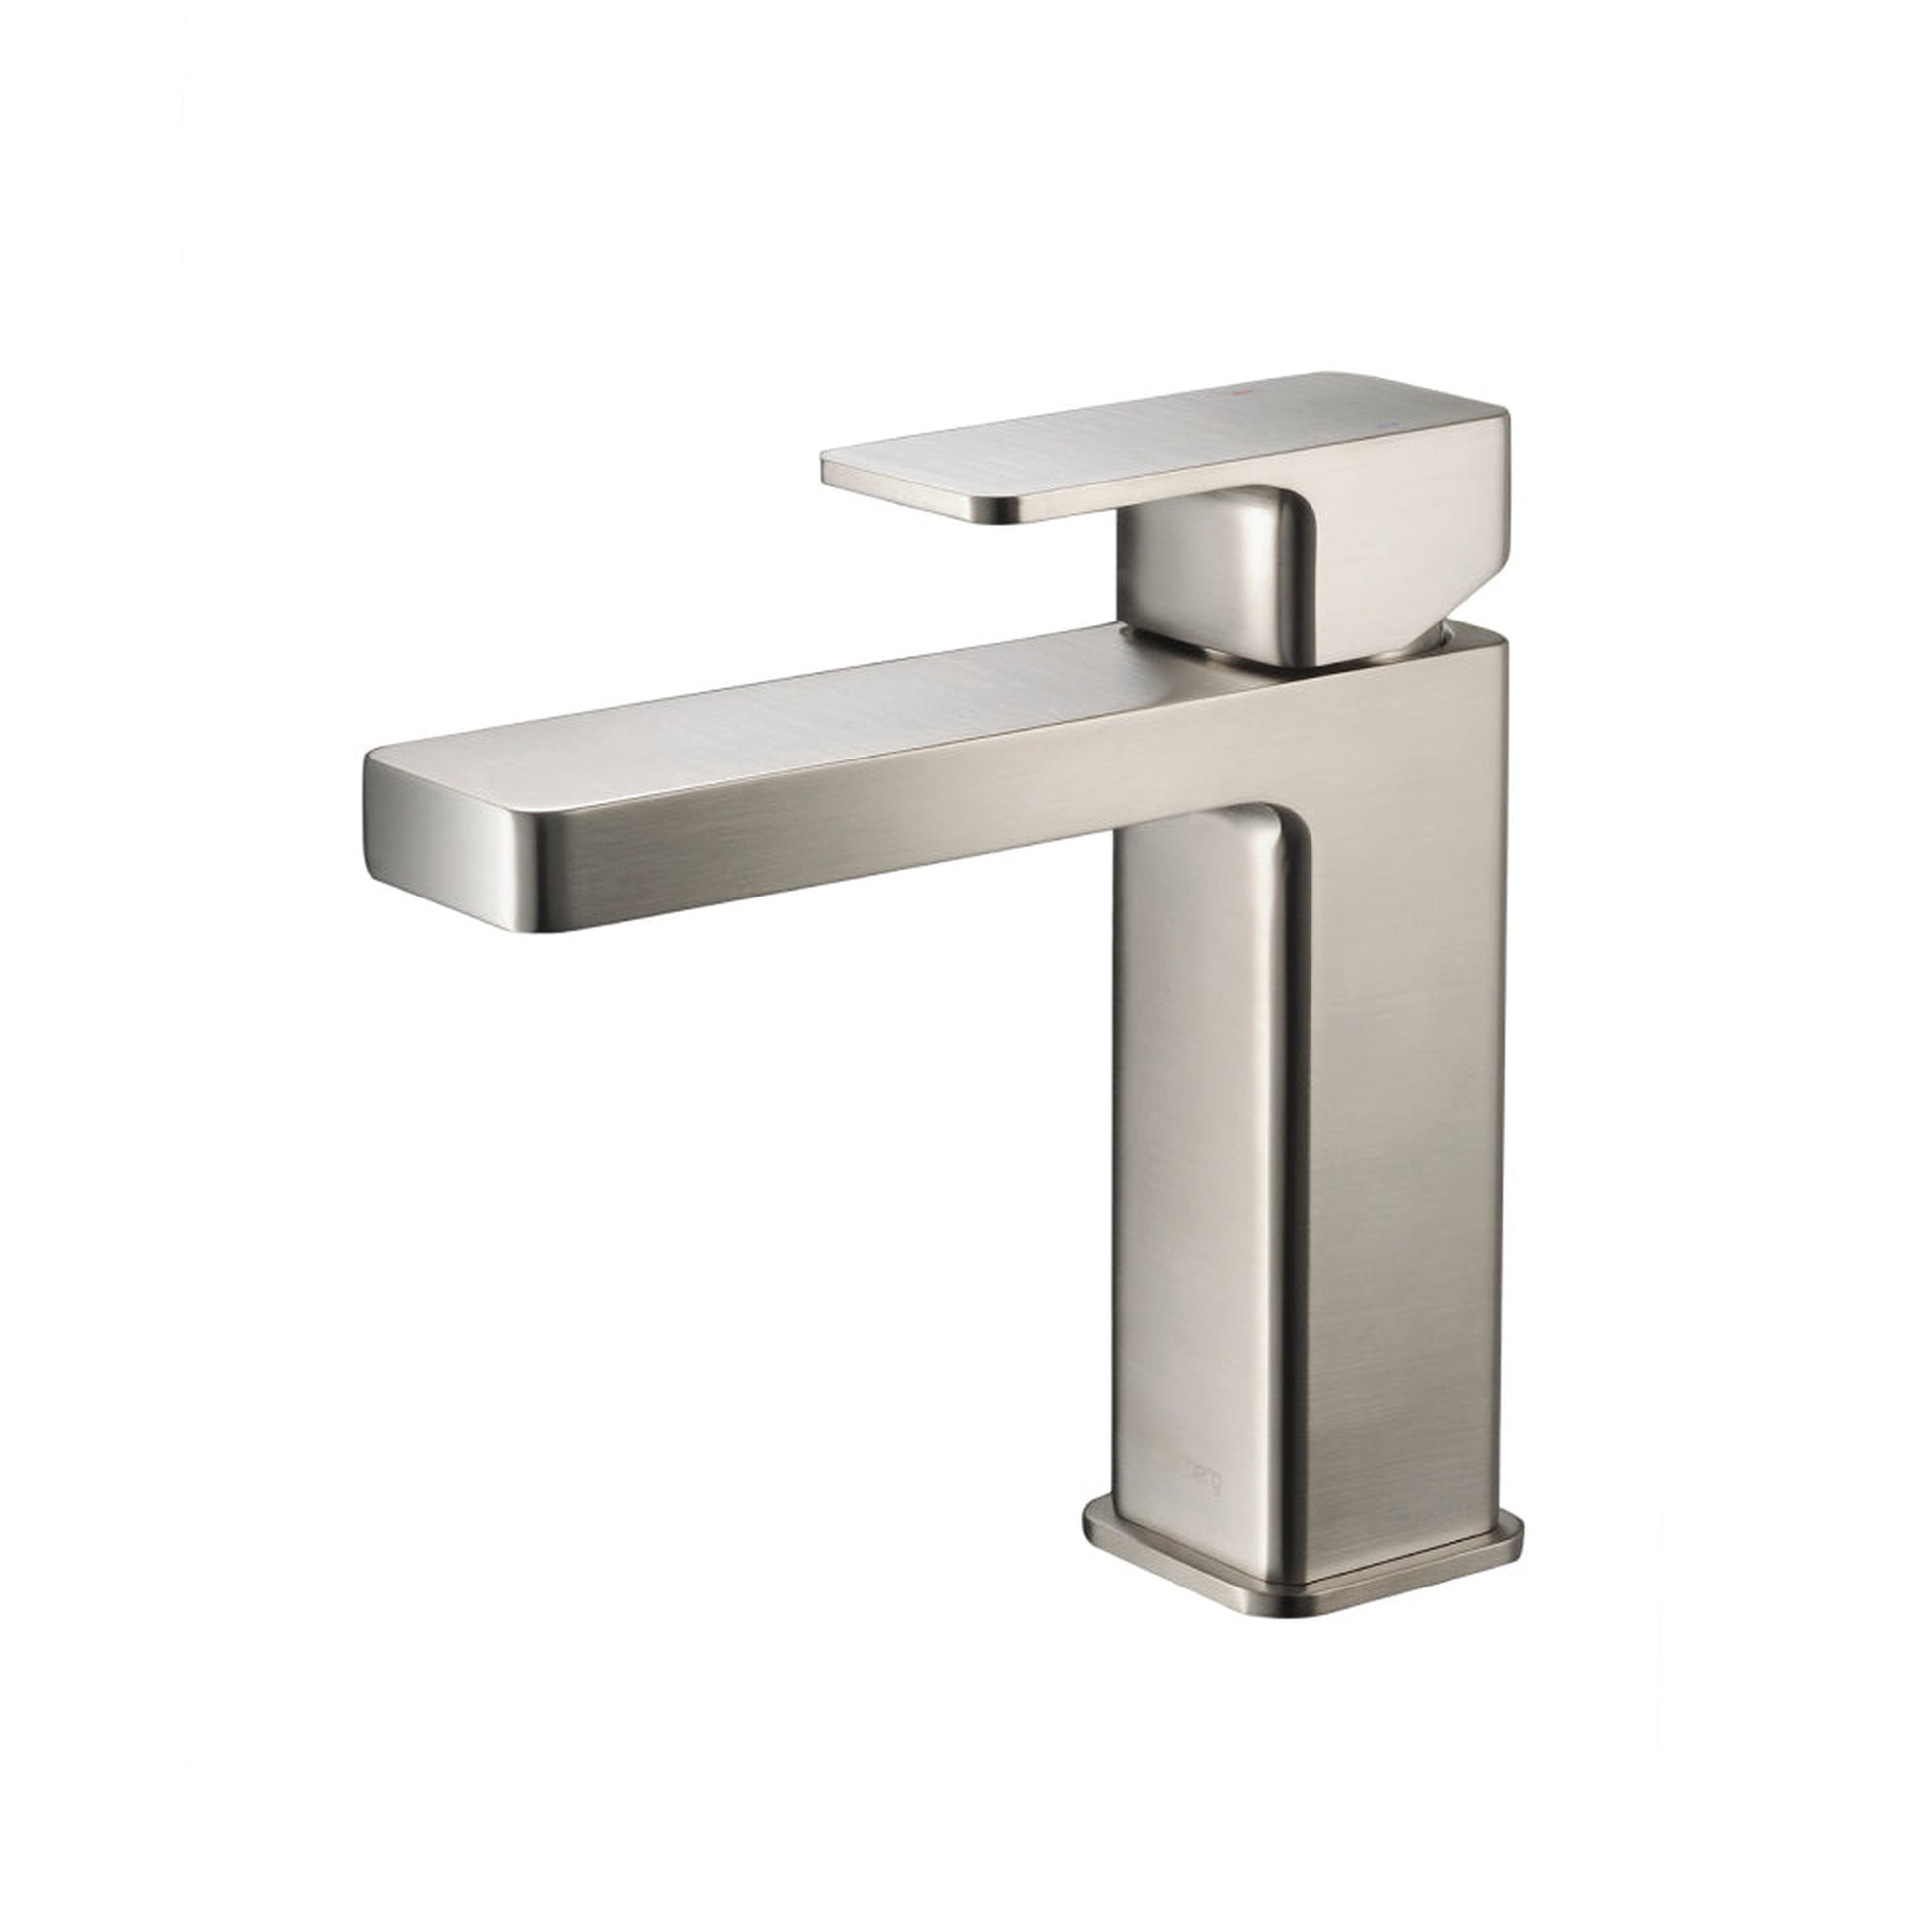 Isenberg Serie 196 7" Single-Hole Brushed Nickel PVD Deck-Mounted Bathroom Sink Faucet With Pop-Up Drain and Adjustable Hot Limit Safety Stop